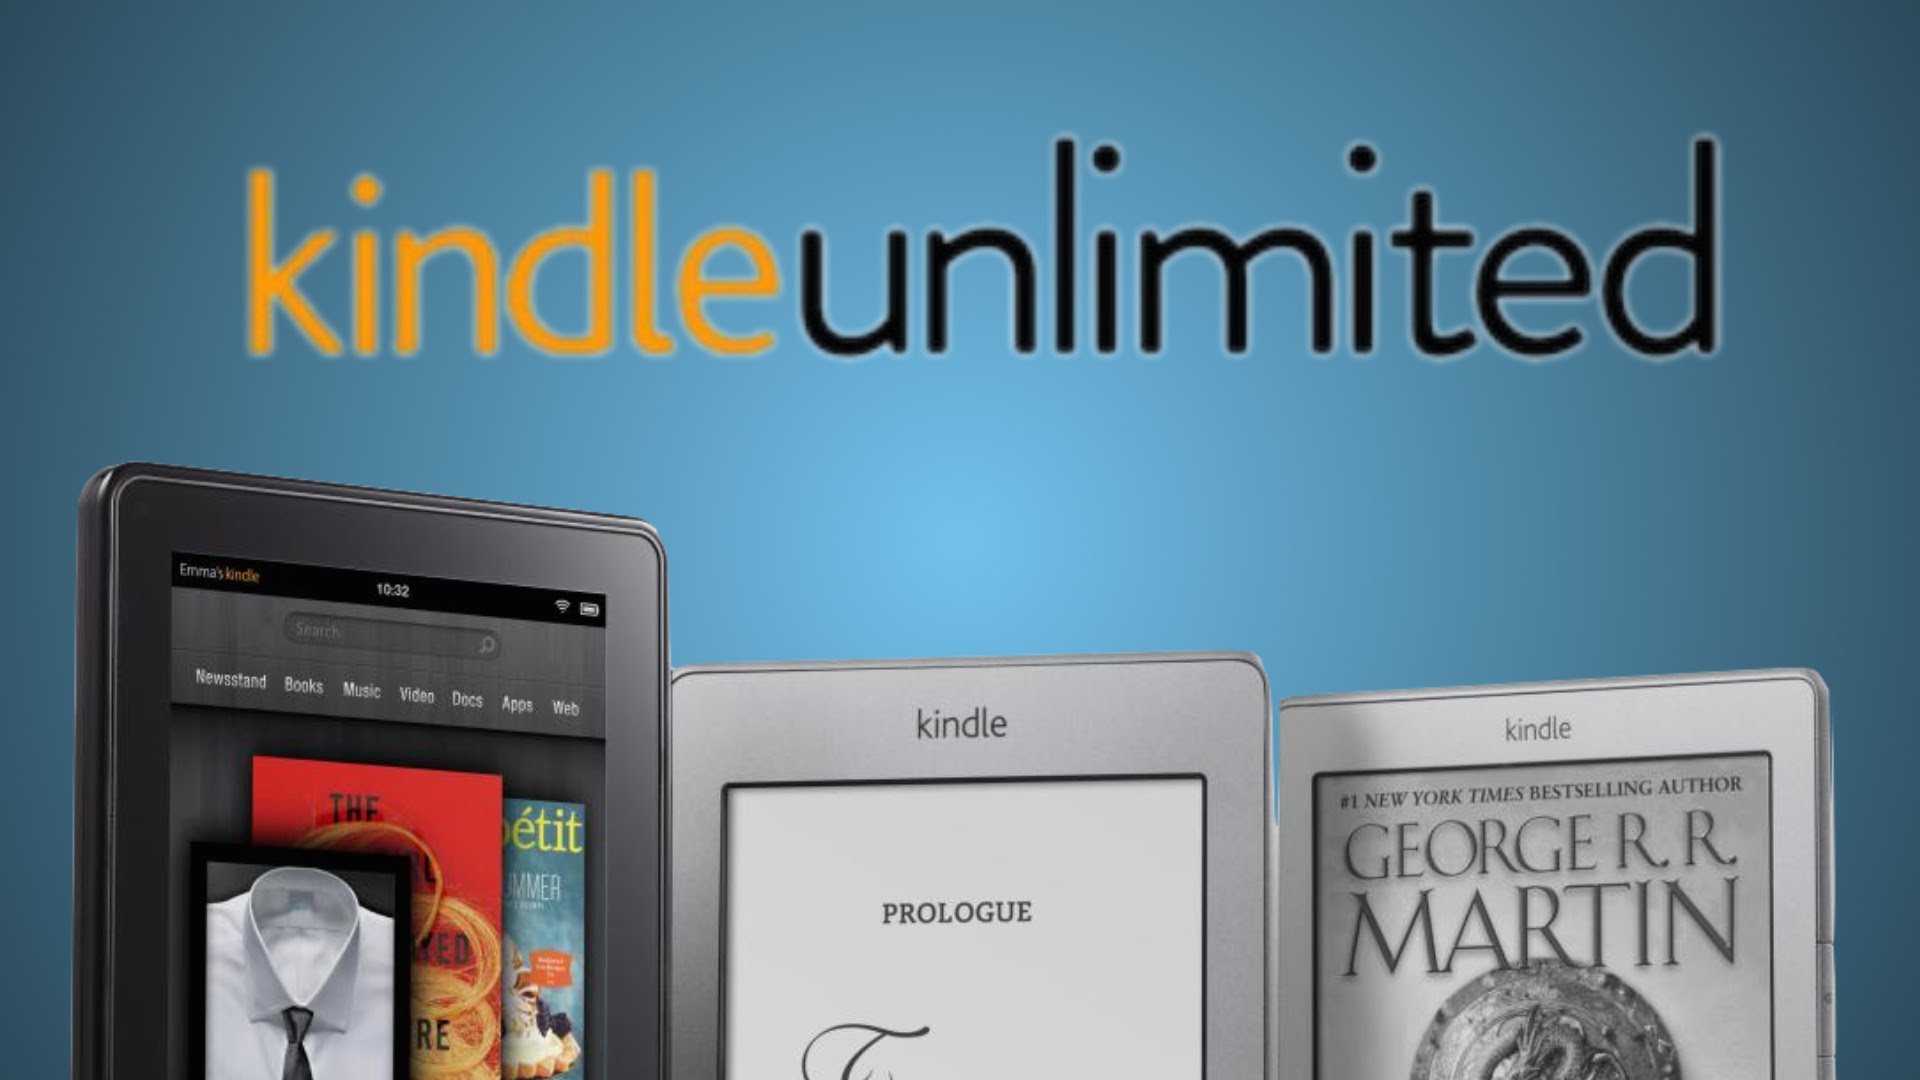 Read all you can for FREE w/ 3months of Amazon Kindle Unlimited (30 value) 9to5Toys